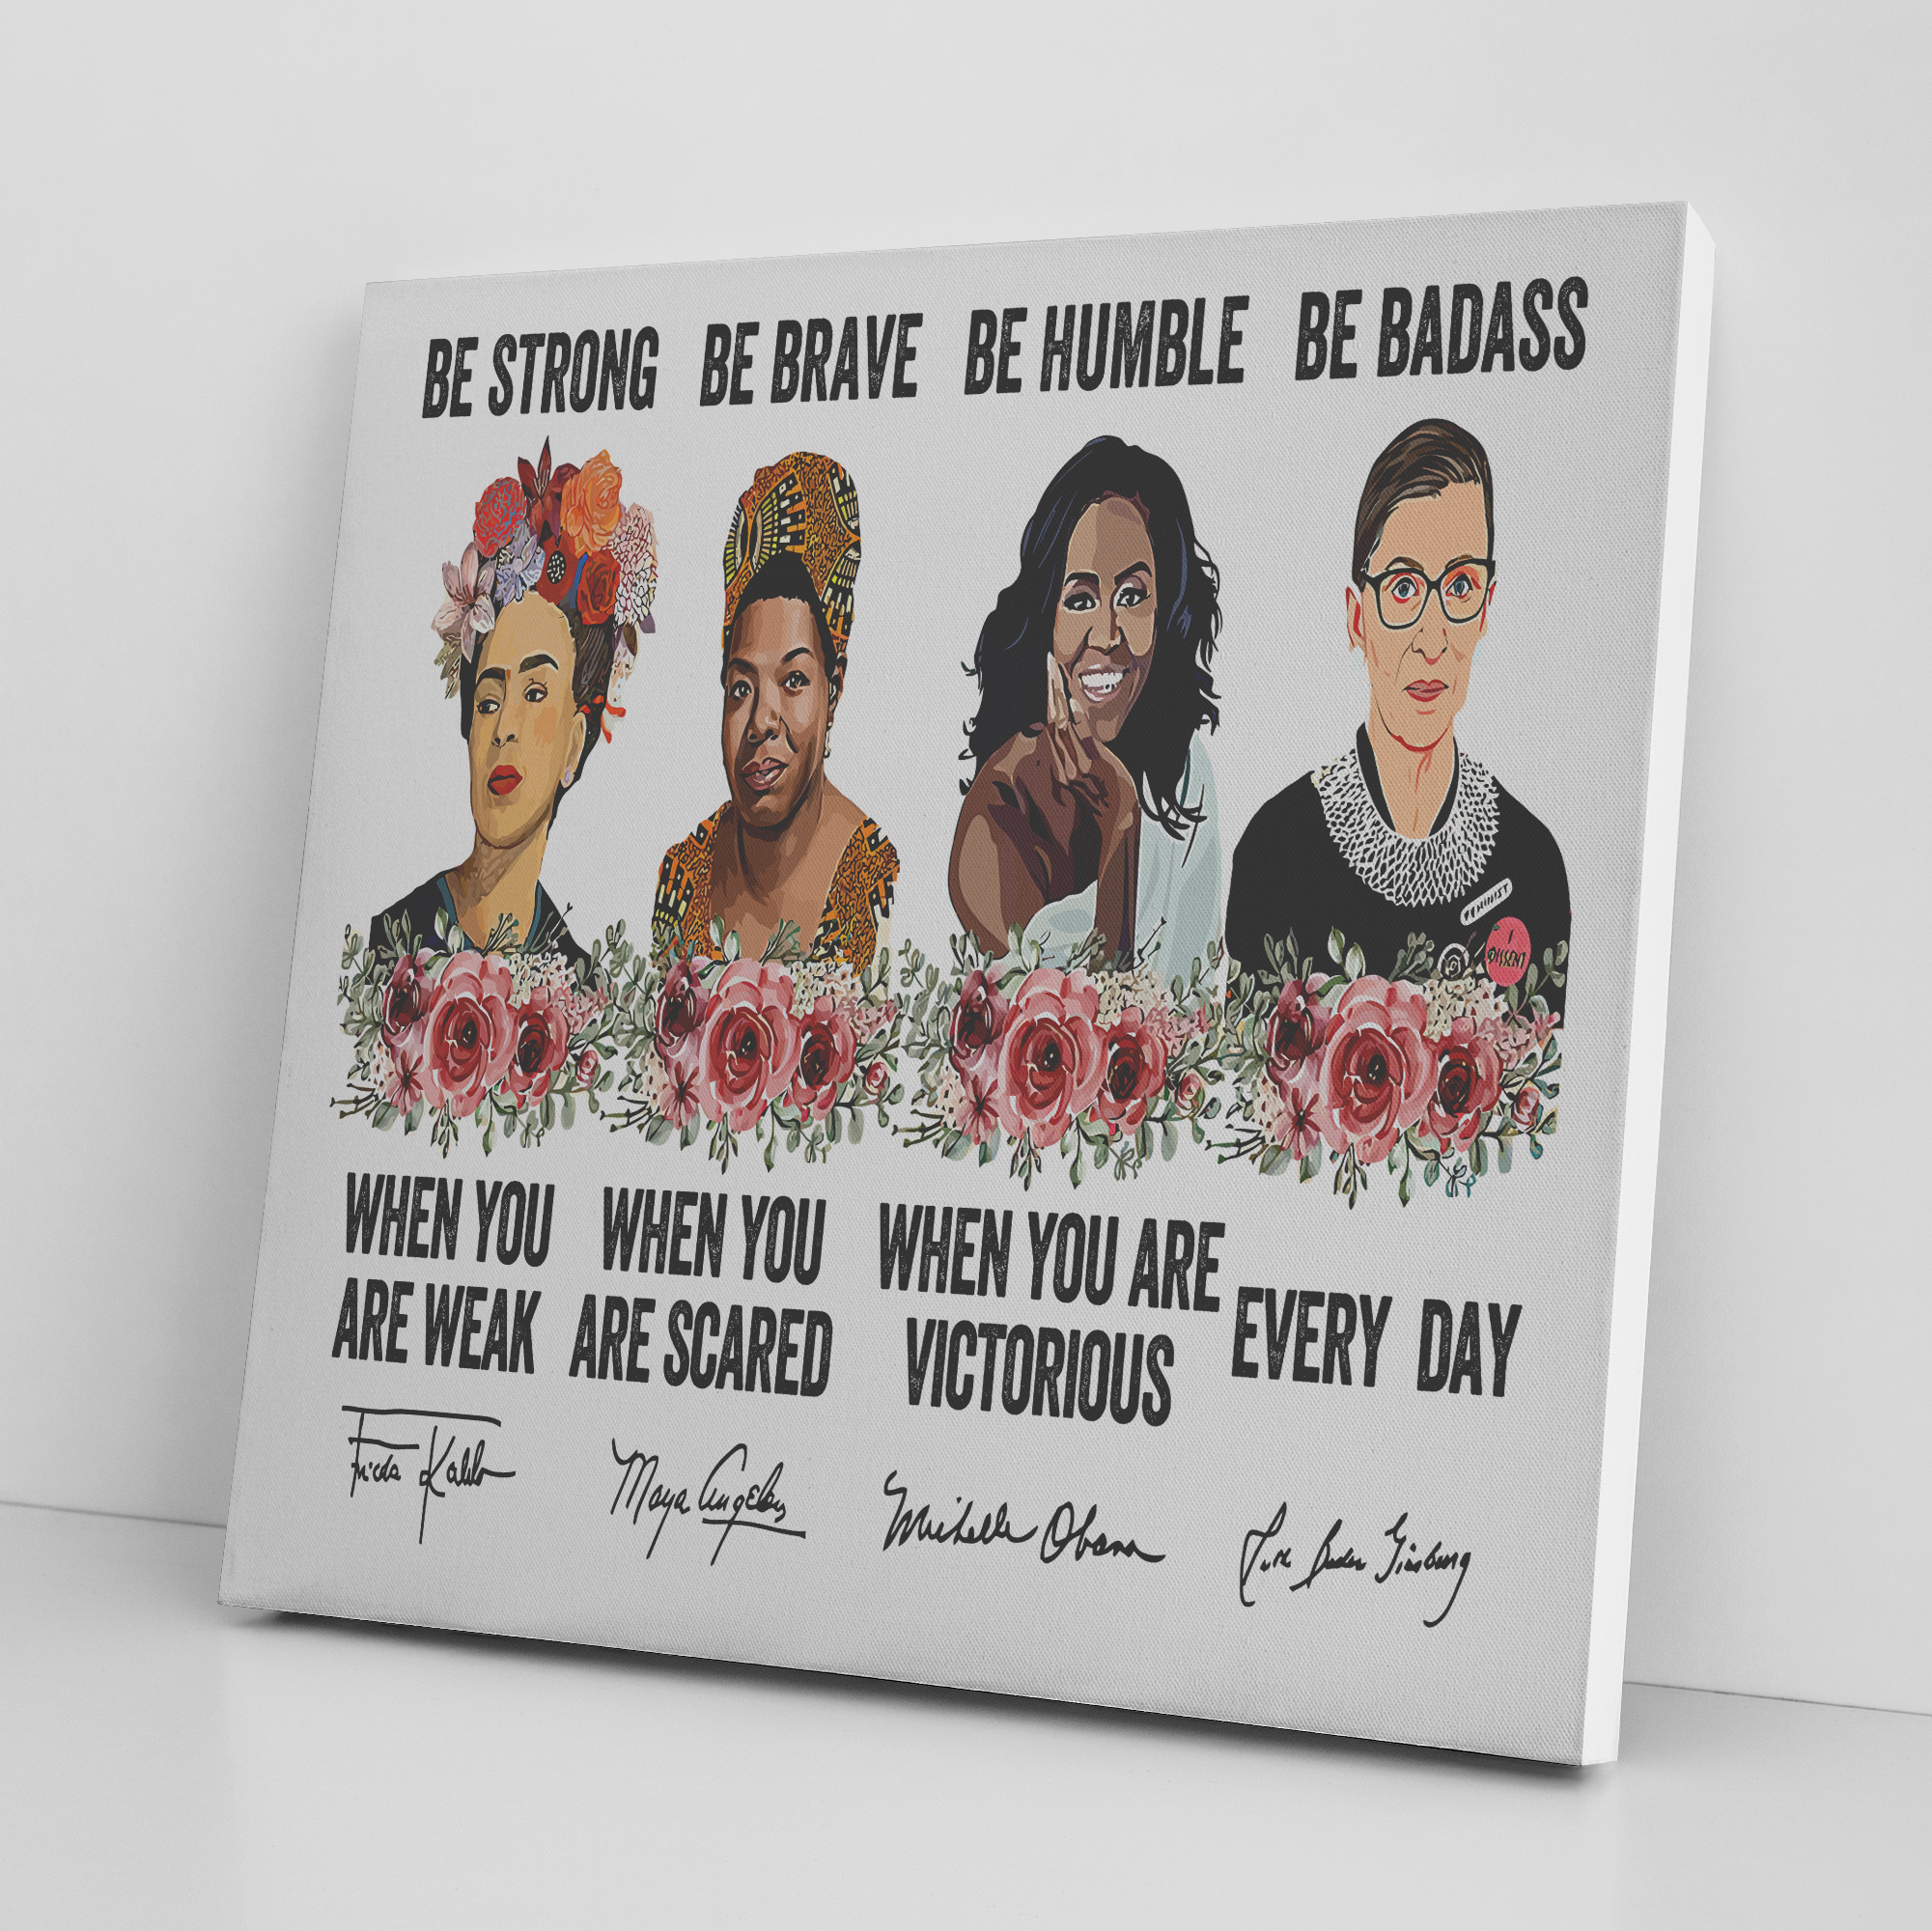 '' BE STRONG BE BRAVE BE HUMBLE BE BADASS'' CANVAS